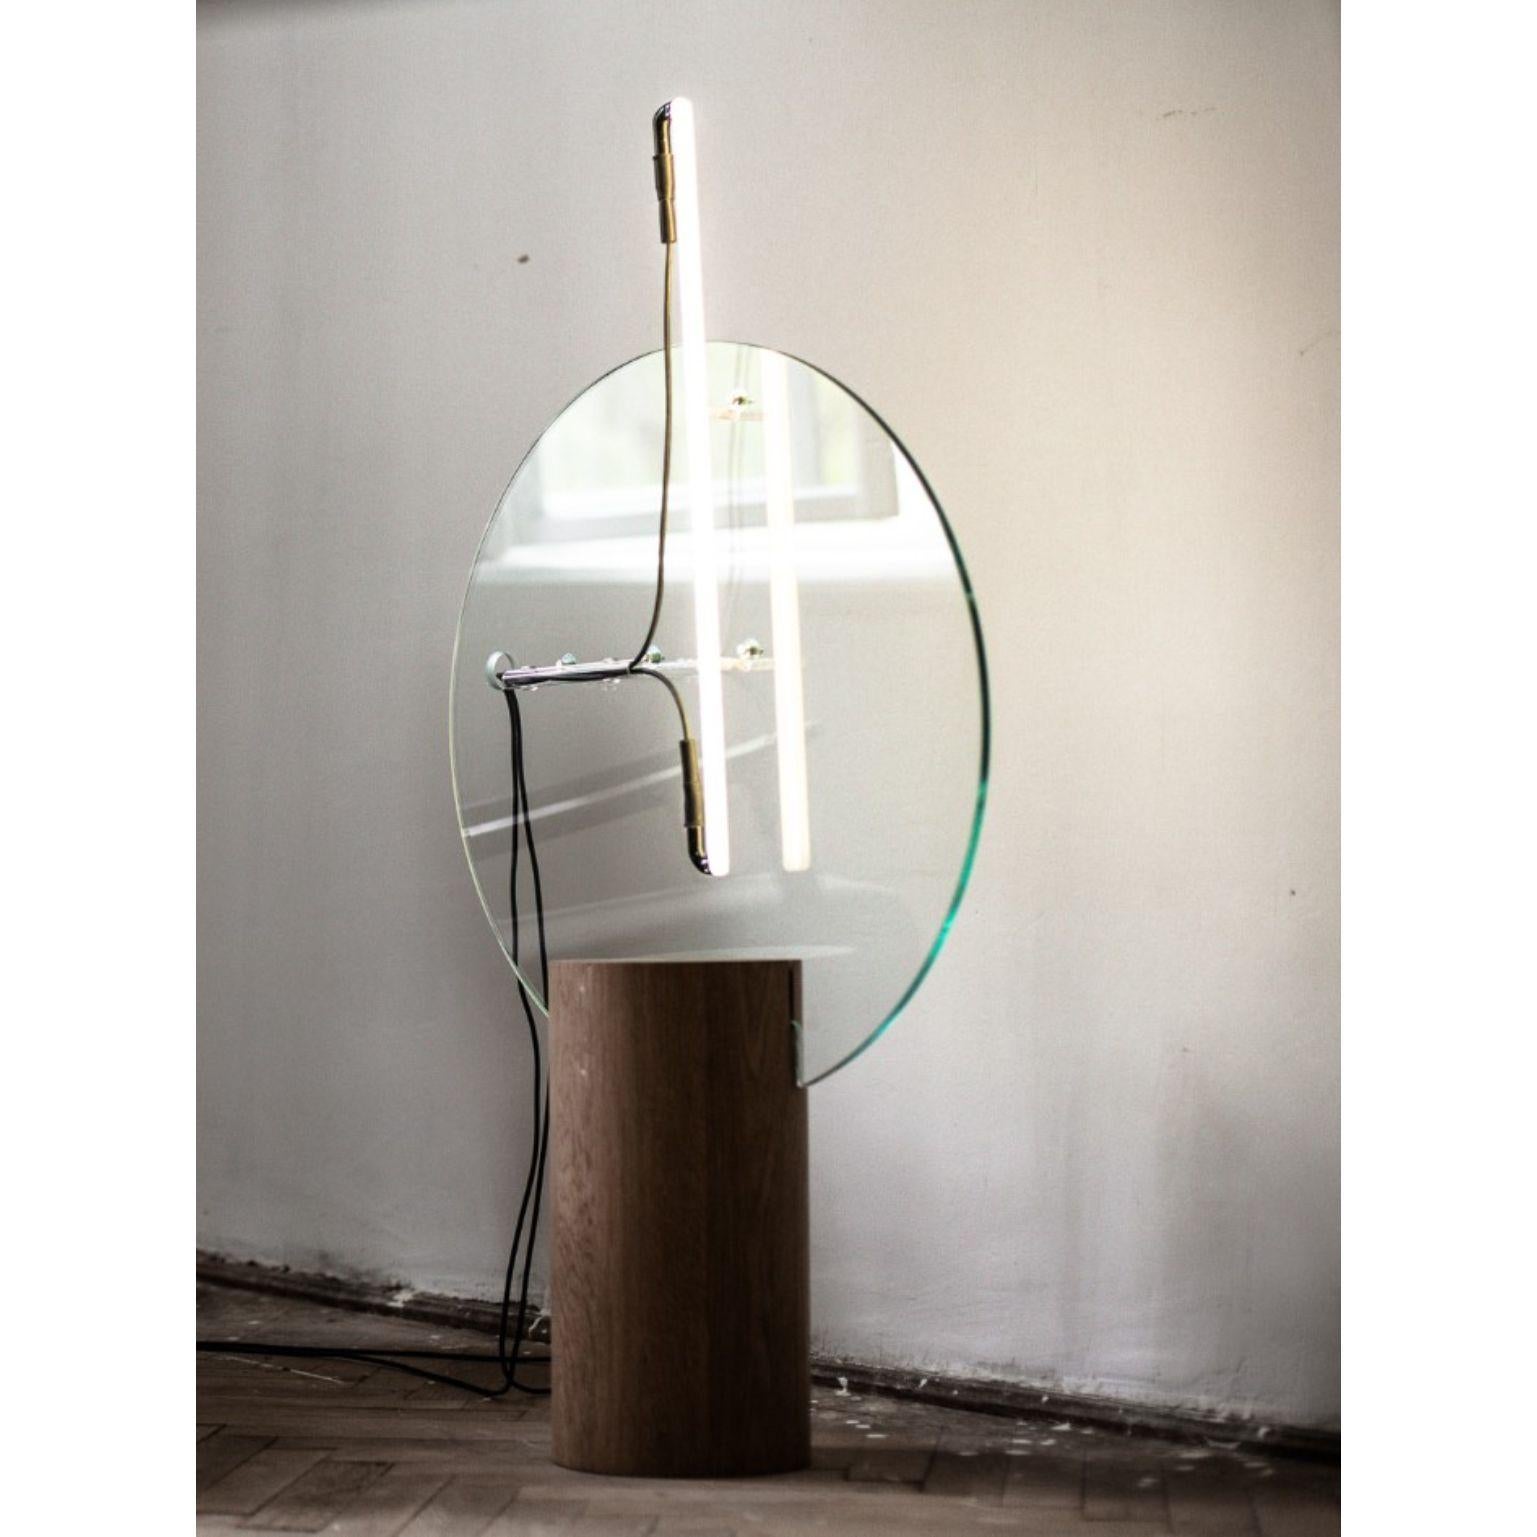 8 Minutes round by Radu Abraham
Materials: oak wood, glass, custom made light tube
Dimensions: 60 x 20 x 90 cm

All our lamps can be wired according to each country. If sold to the USA it will be wired for the USA for instance.

The base is